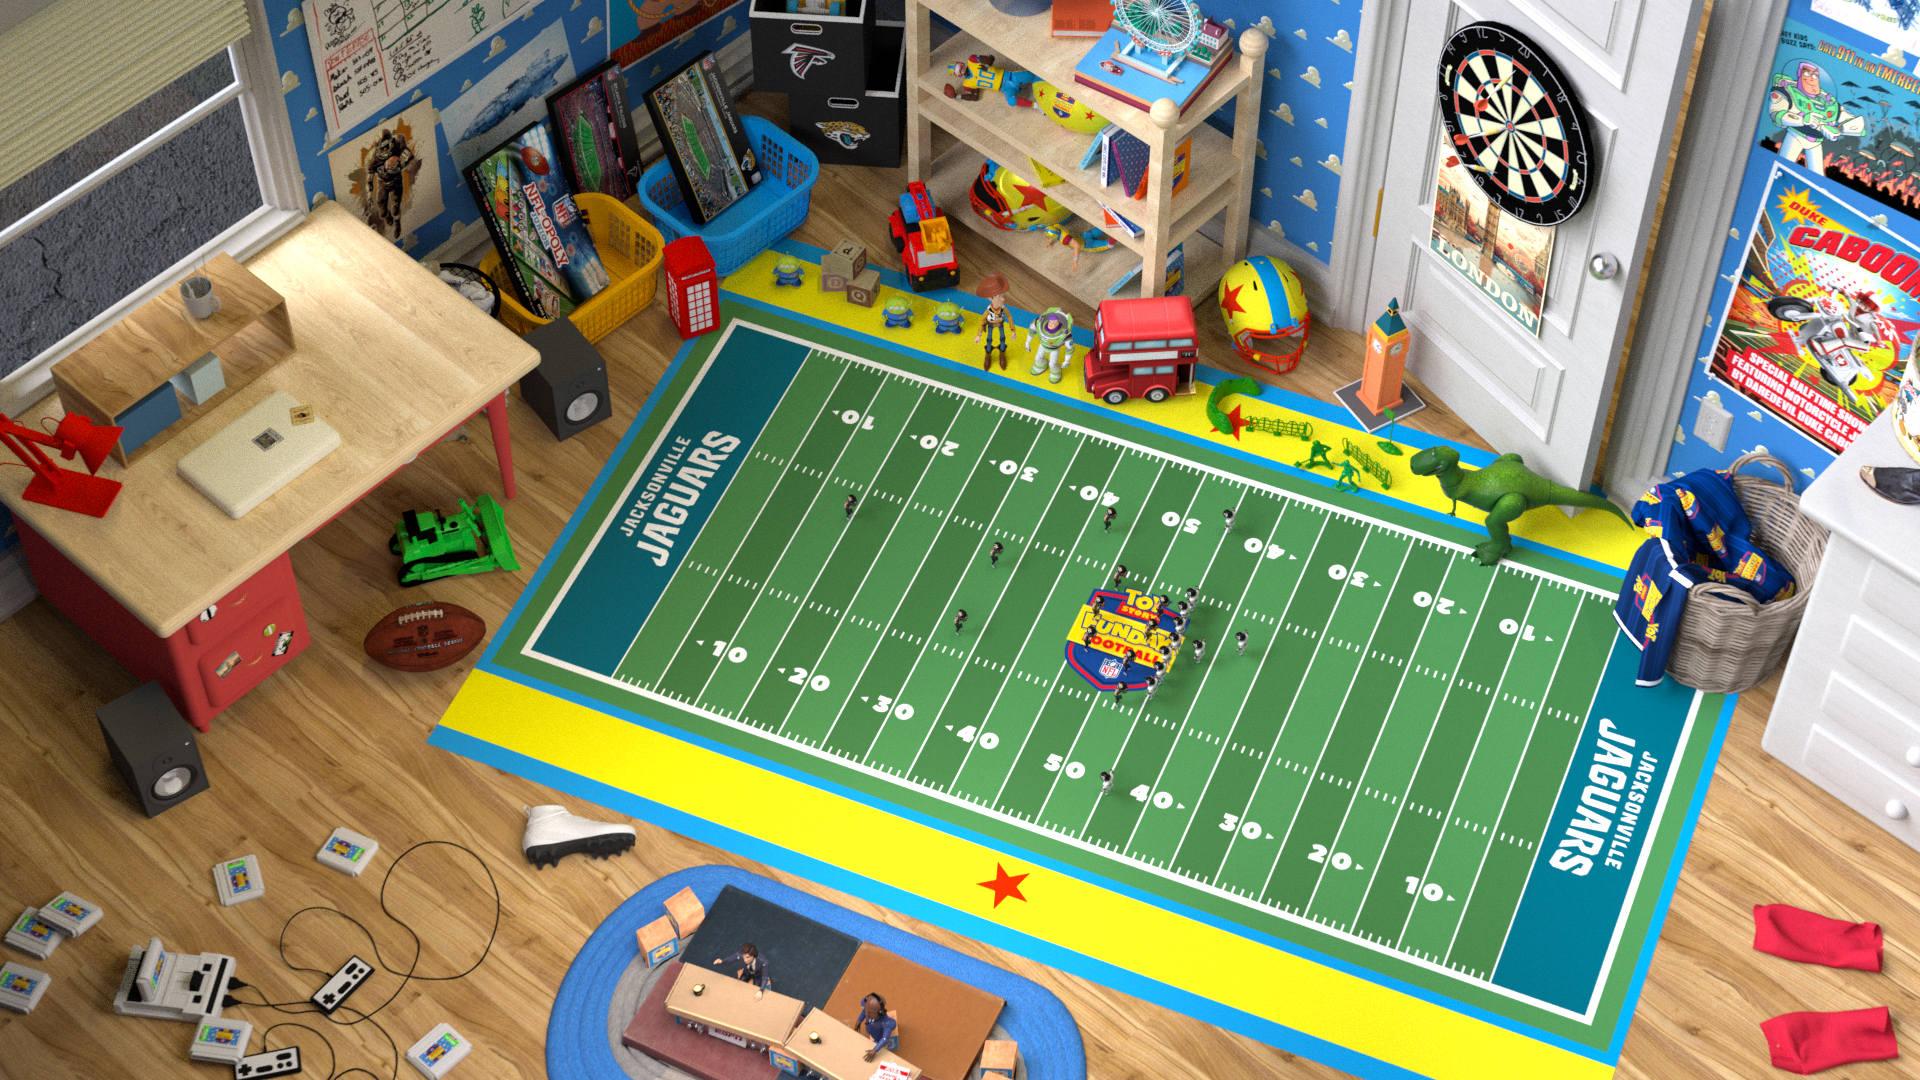 NFL Will Recreate the Jaguars Vs. Falcons Game in Animated, “Toy Story” Form in Real Time